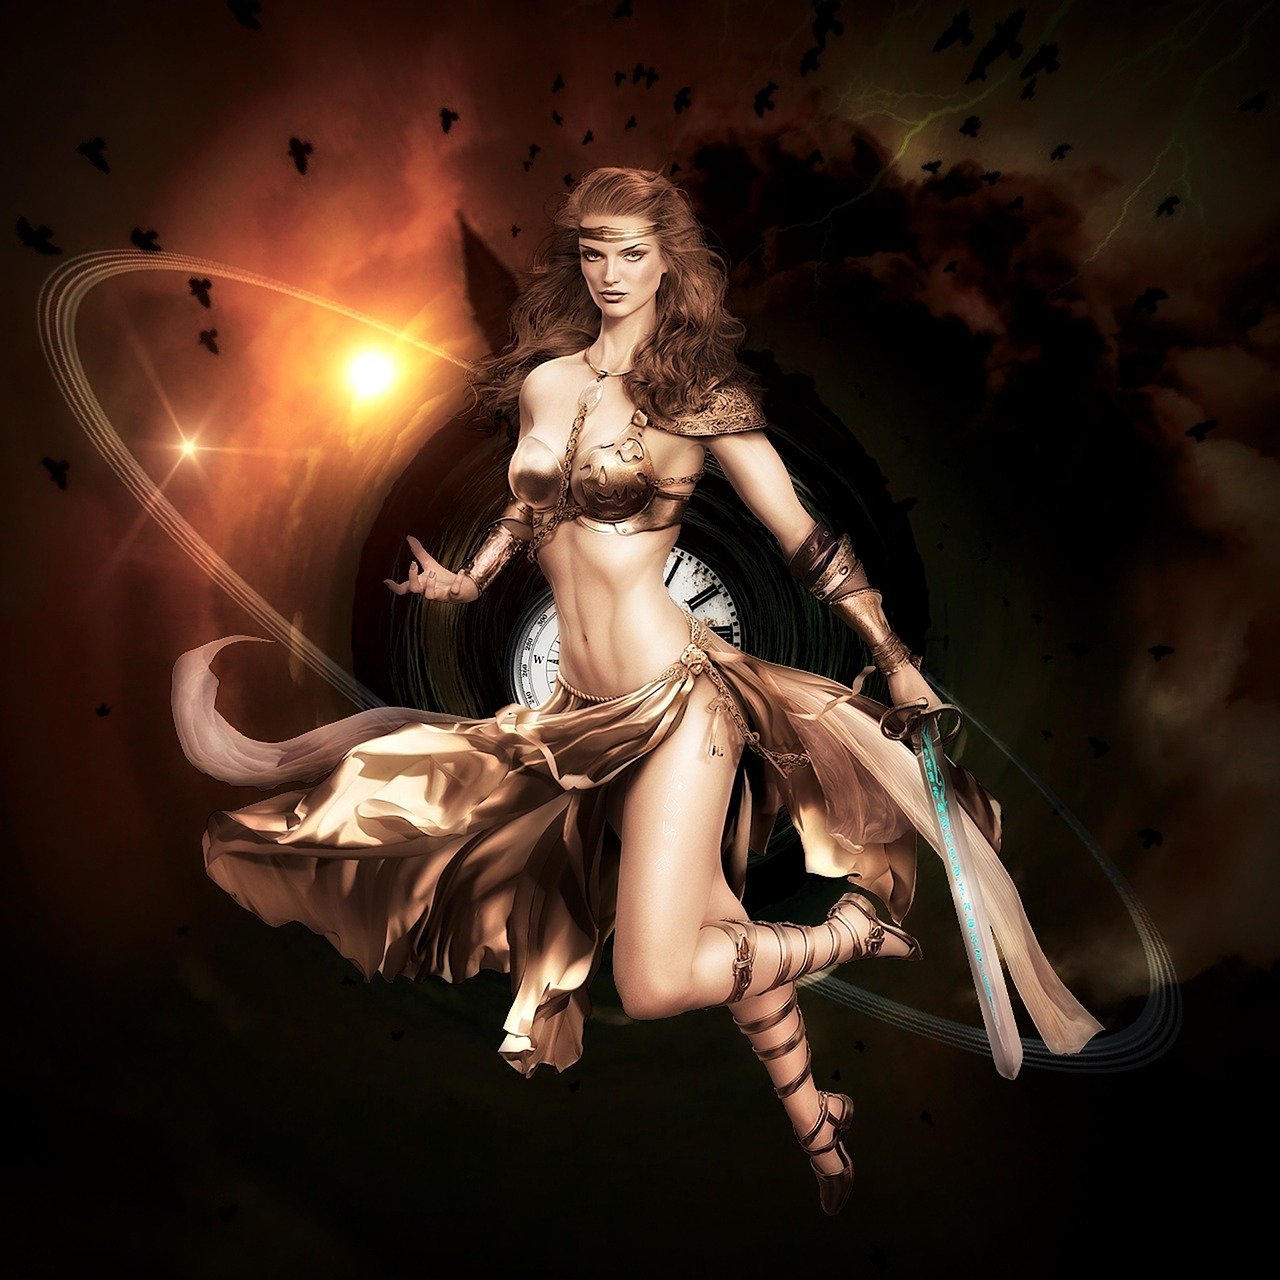 a woman that is in the air with a sword, fantasy art, 3 d goddess minerva, taurus, goddess of space and time, fantasy character photo